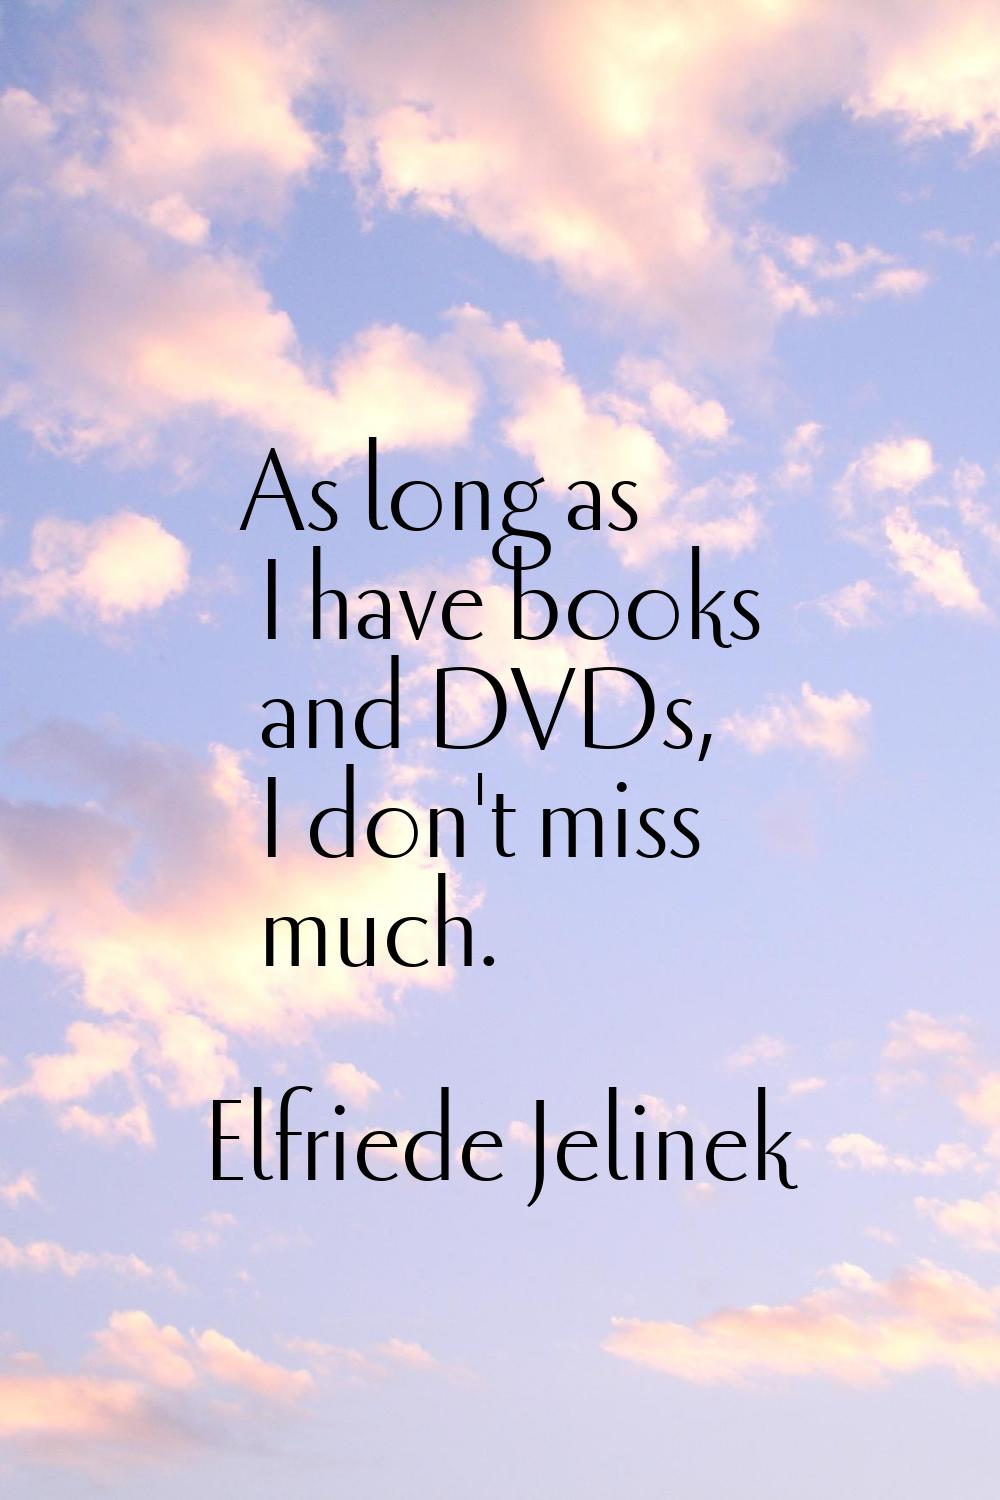 As long as I have books and DVDs, I don't miss much.